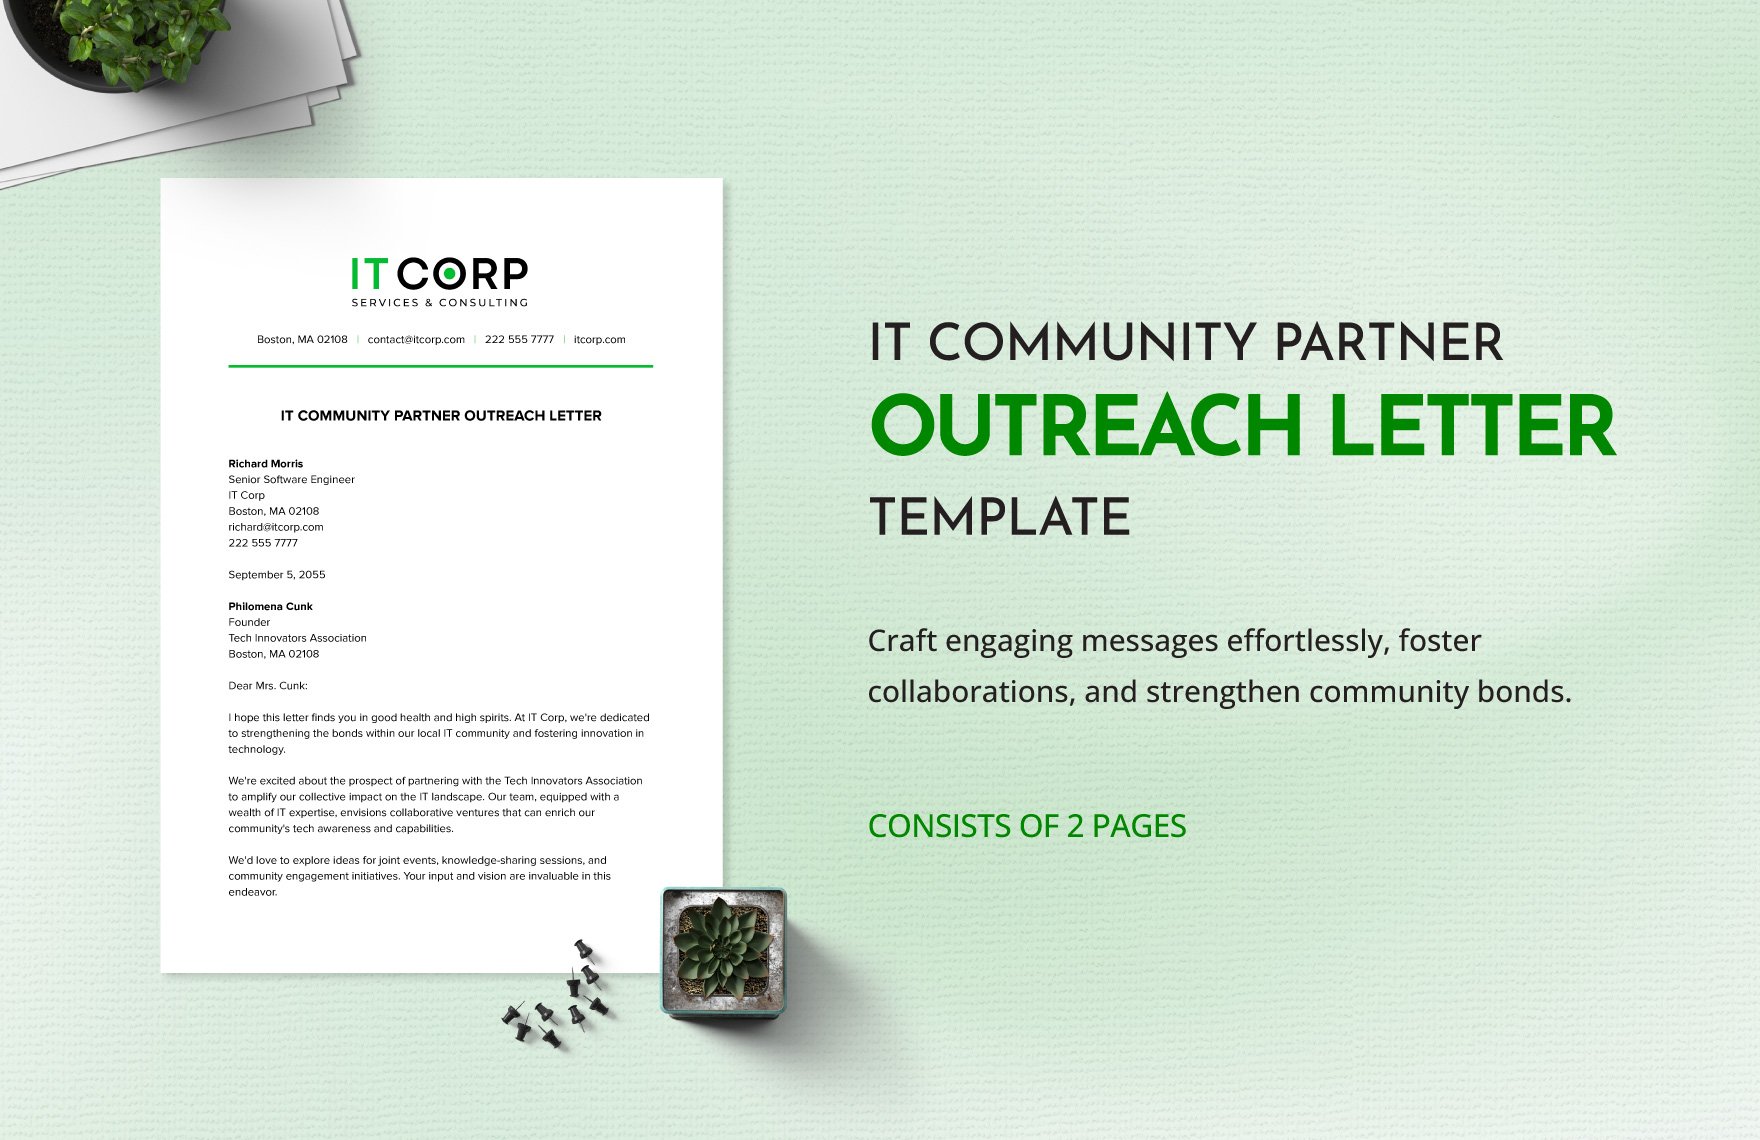 IT Community Partner Outreach Letter Template in Word, Google Docs, PDF